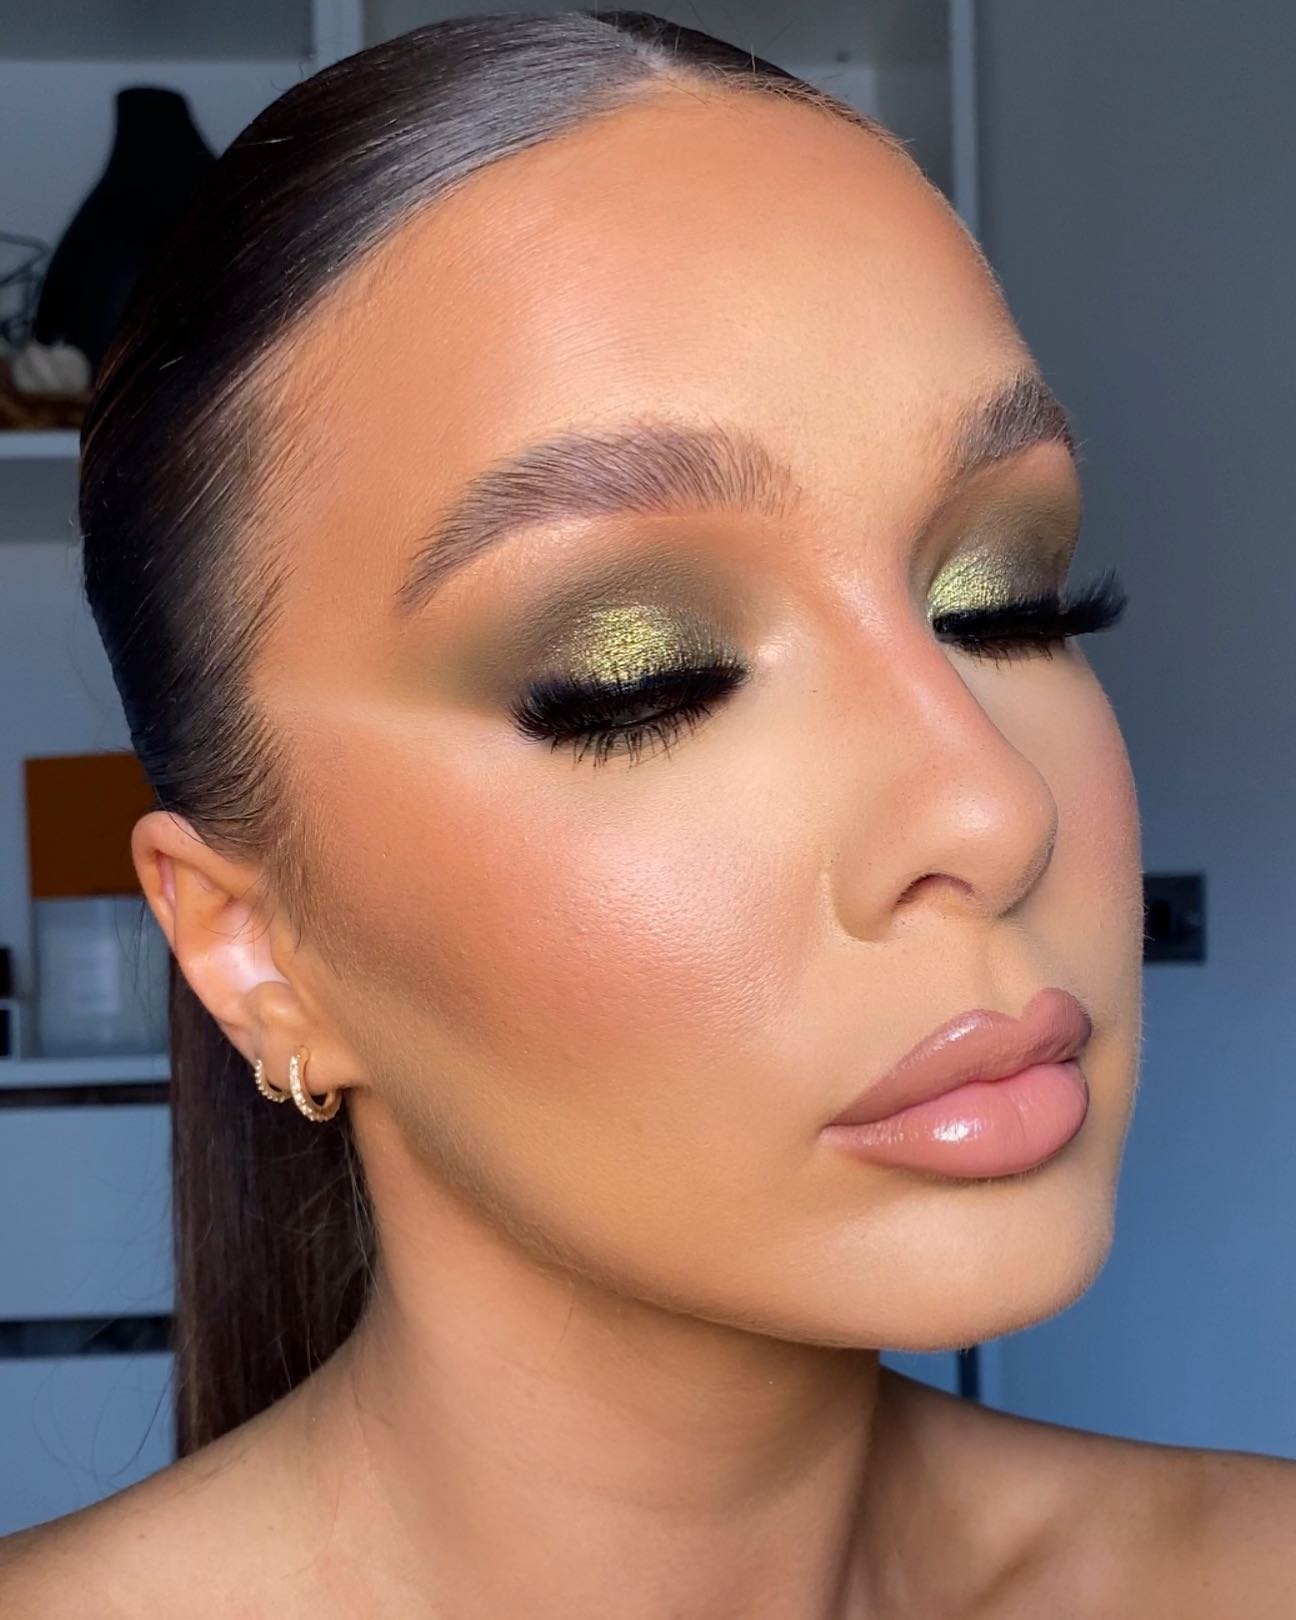 ✨Beautiful makeup inspired for a green prom dress✨ Follow for more makeup  ideas ☺️ . Palette @jcatbeauty Gloss @italiadeluxemakeup… | Instagram